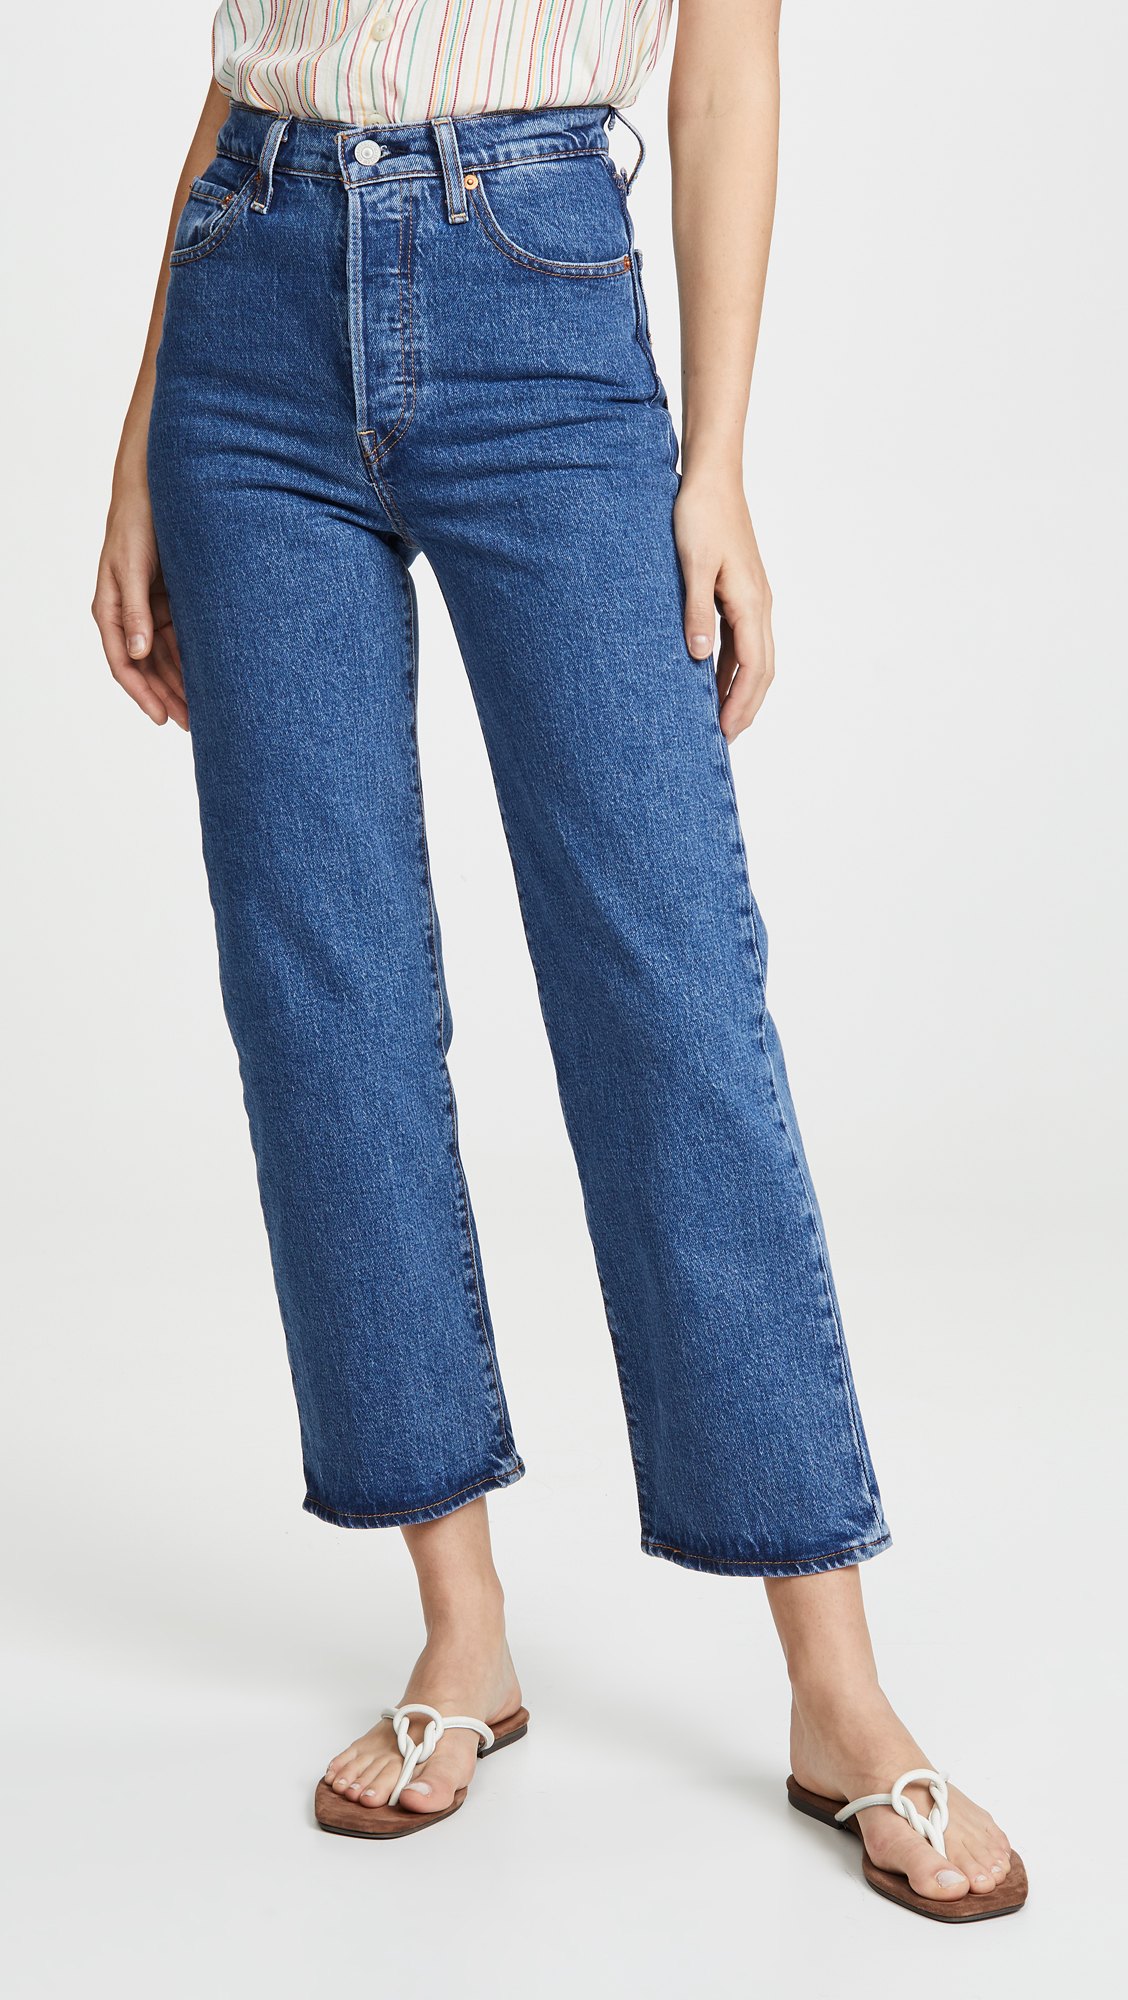 The 5 Most Popular Levi's Jeans for Women | Who What Wear